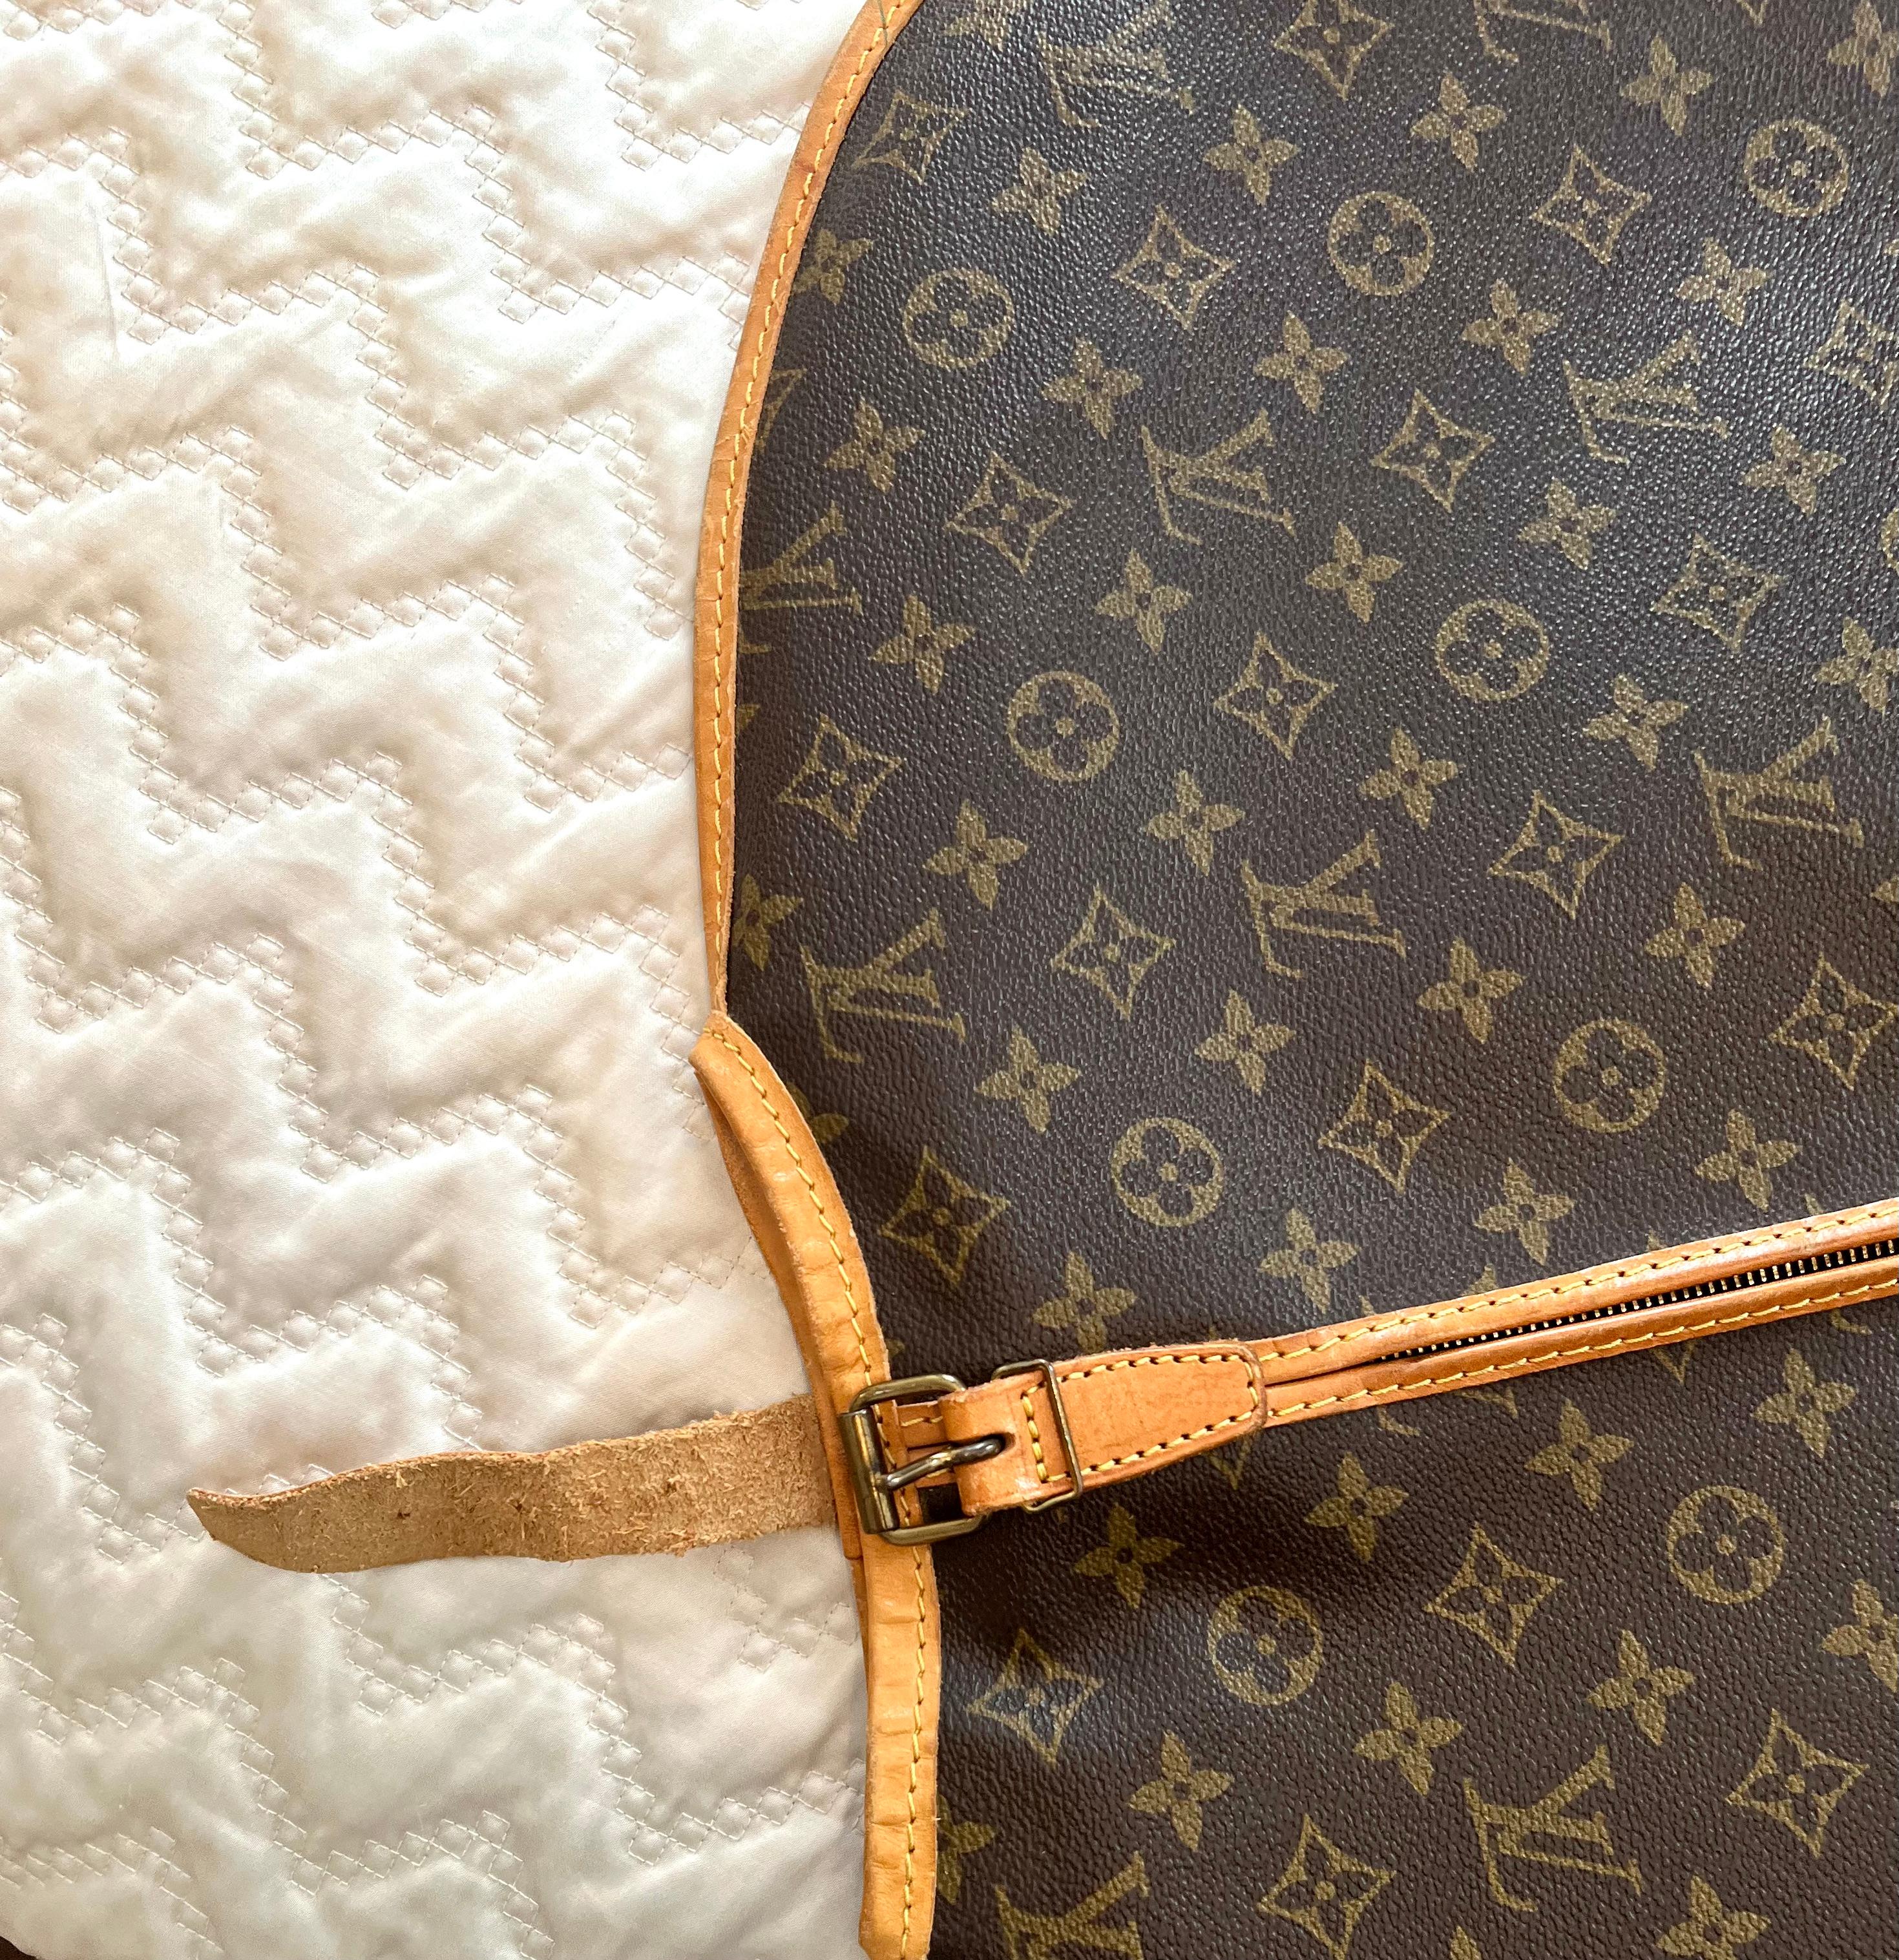 Louis Vuitton Monogram Travel Garment Bag In Good Condition For Sale In Los Angeles, CA